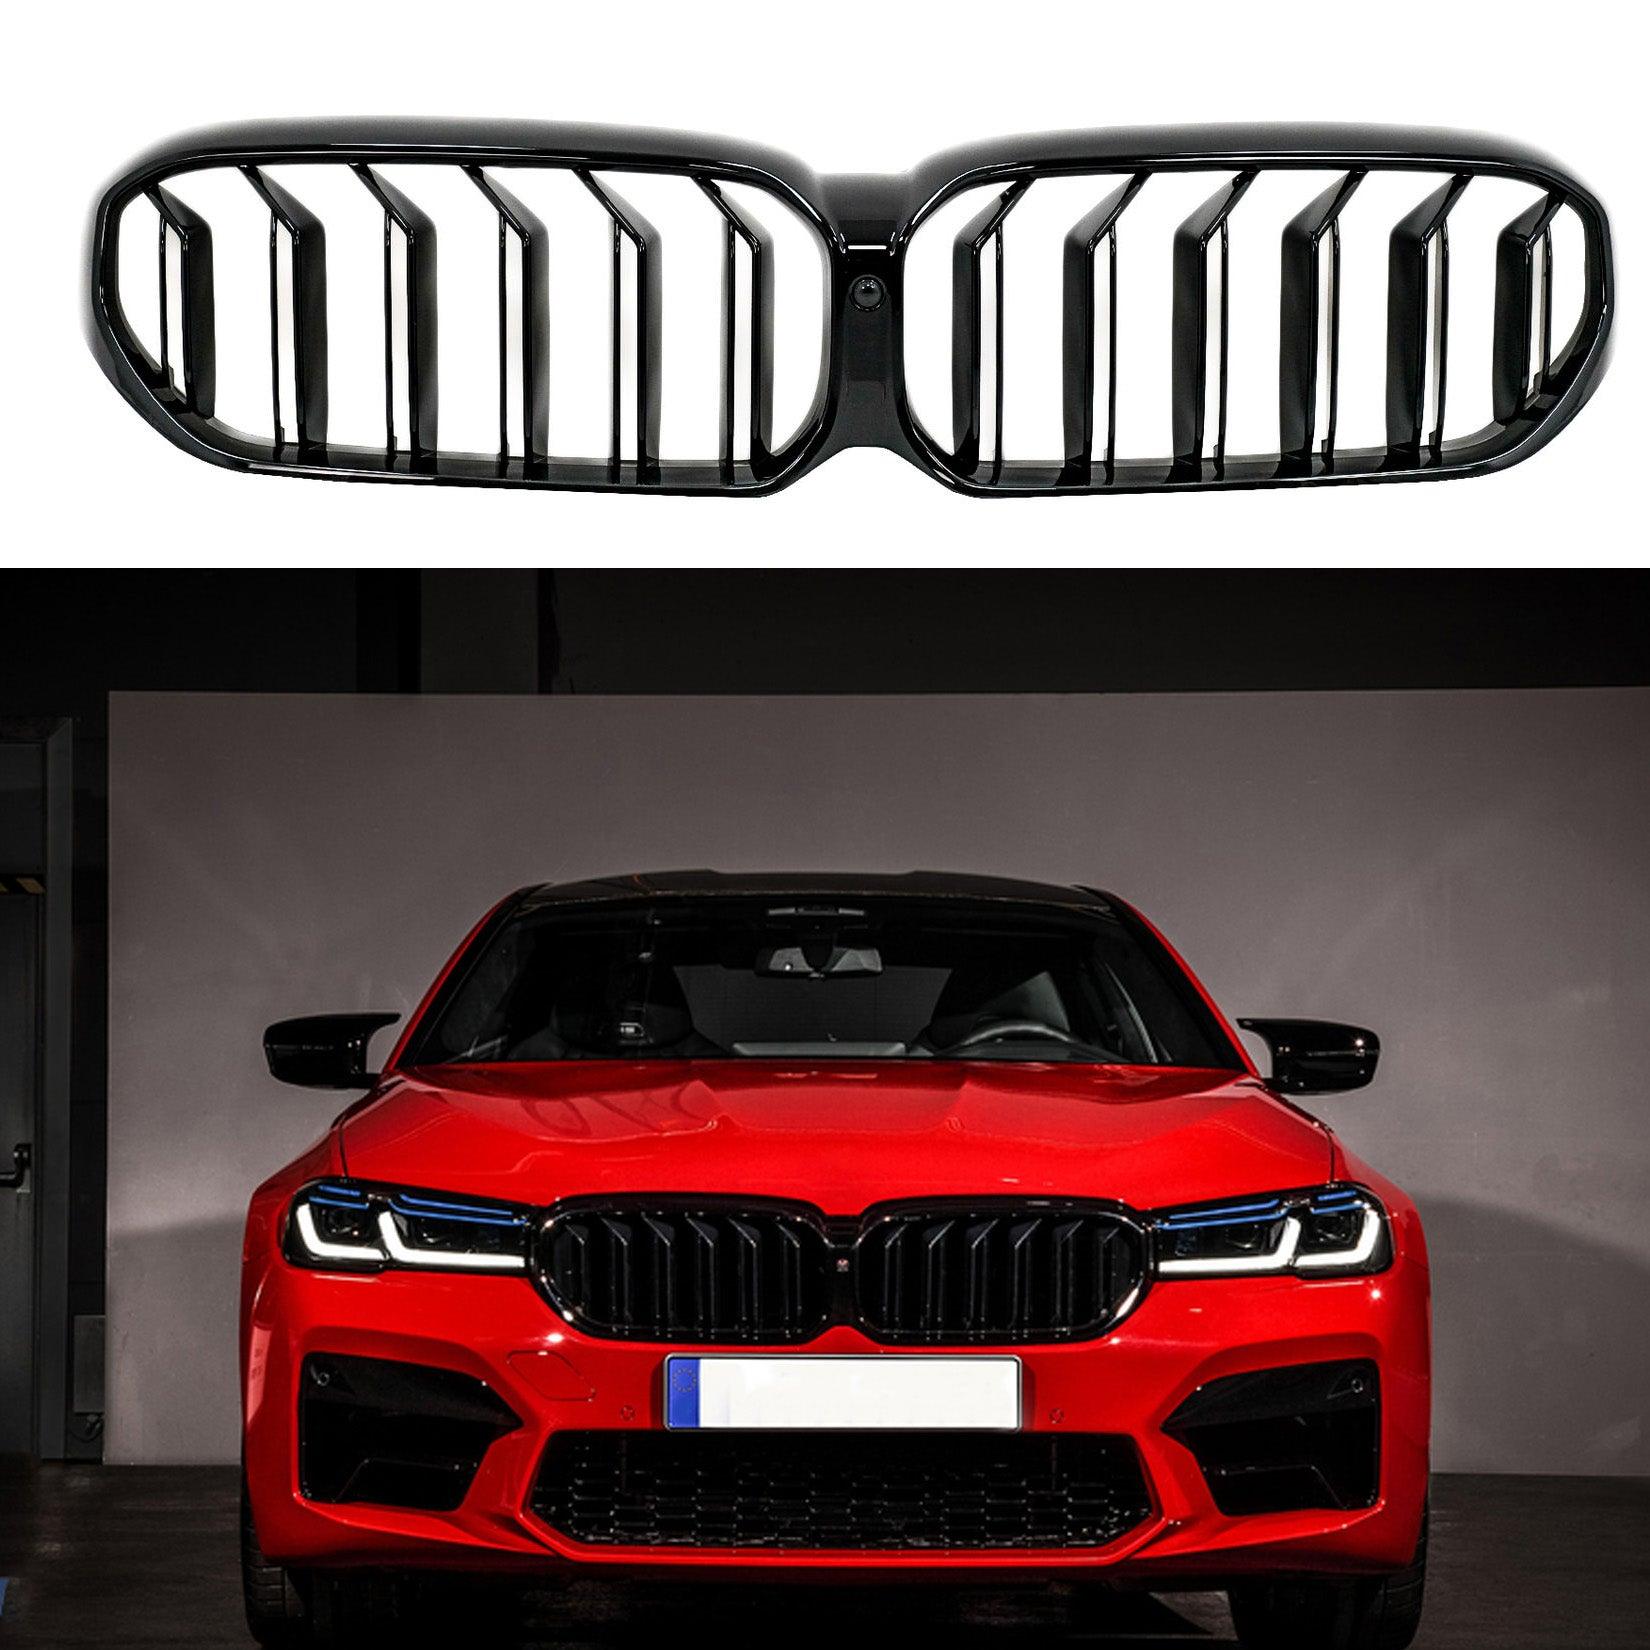 BMW 5 Series G30/G31 2020+ LCI Upgrade Front Grill in Gloss Black - M5 Look